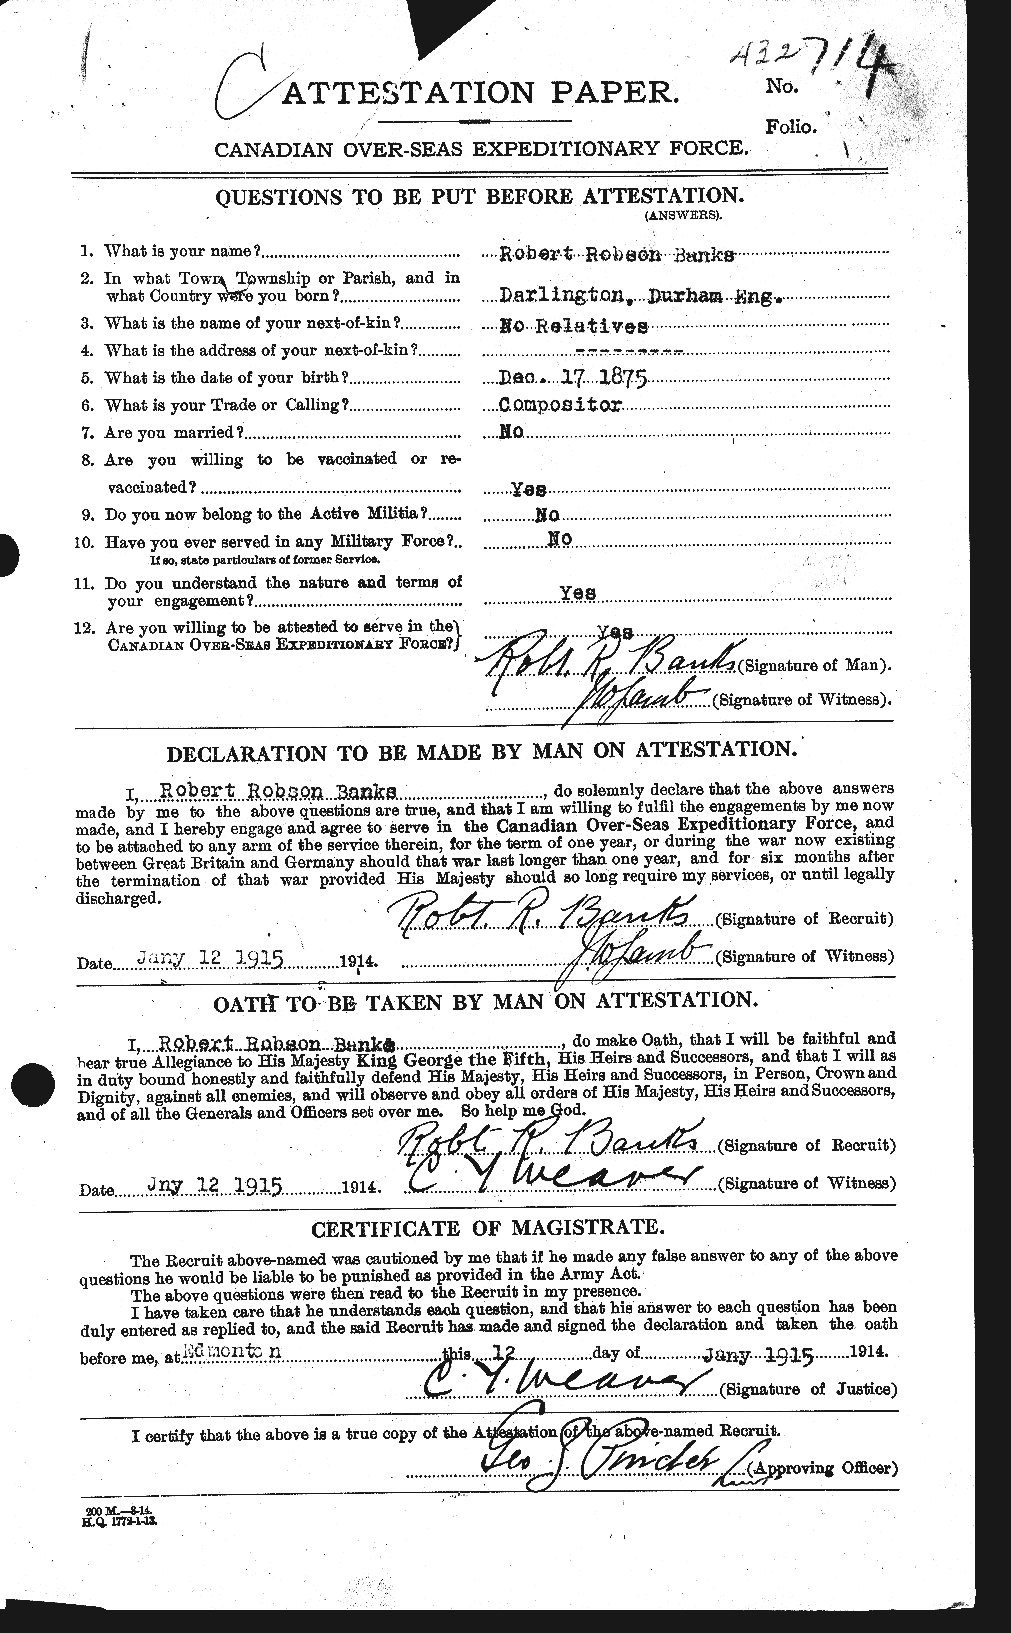 Personnel Records of the First World War - CEF 224955a